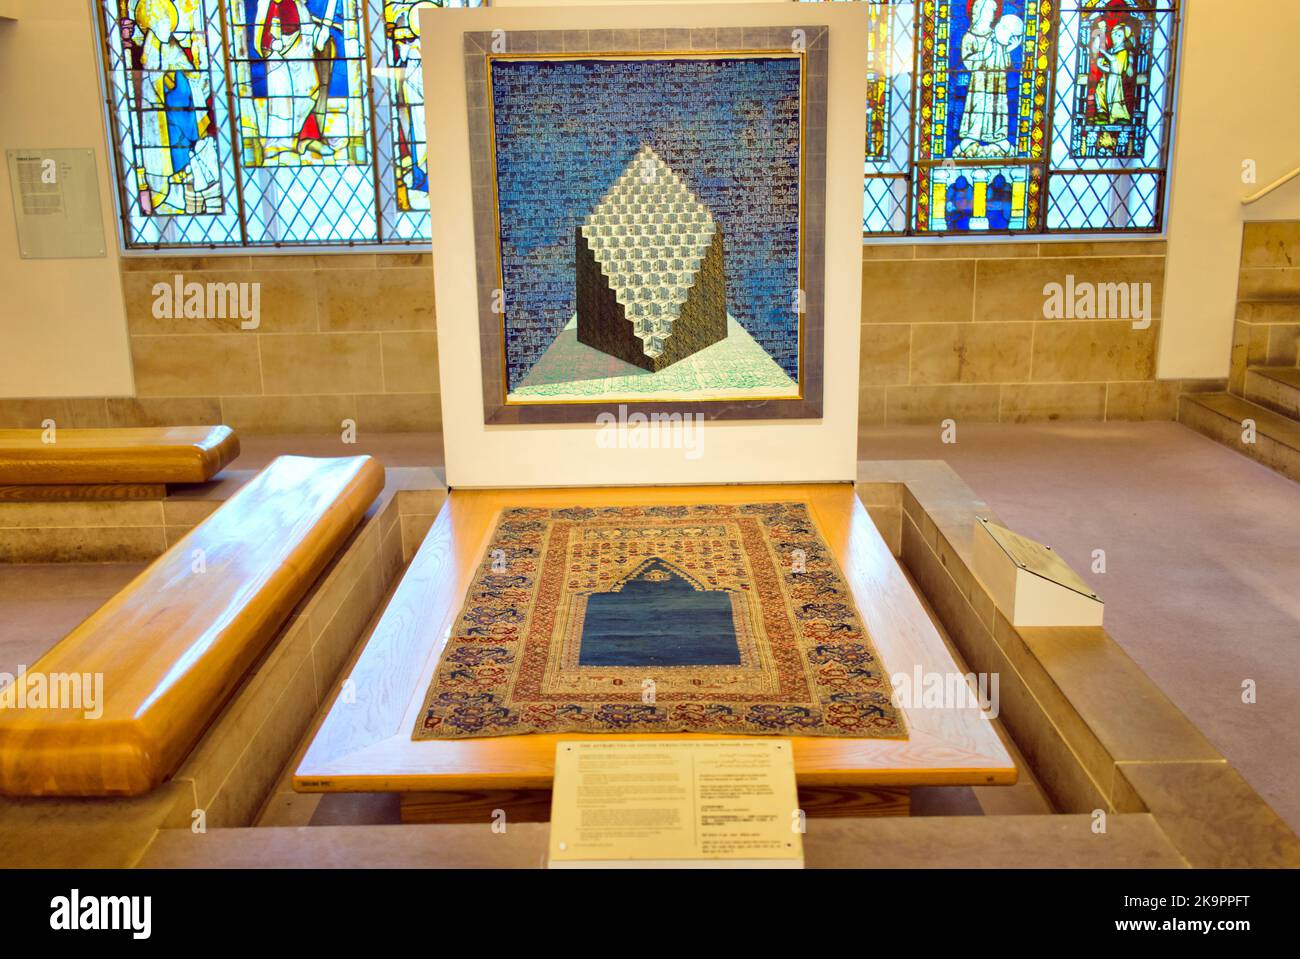 St. Mungo Museum Of Religious Life & Art  The Attributes of Divine Perception by Ahmed Moustafa Stock Photo